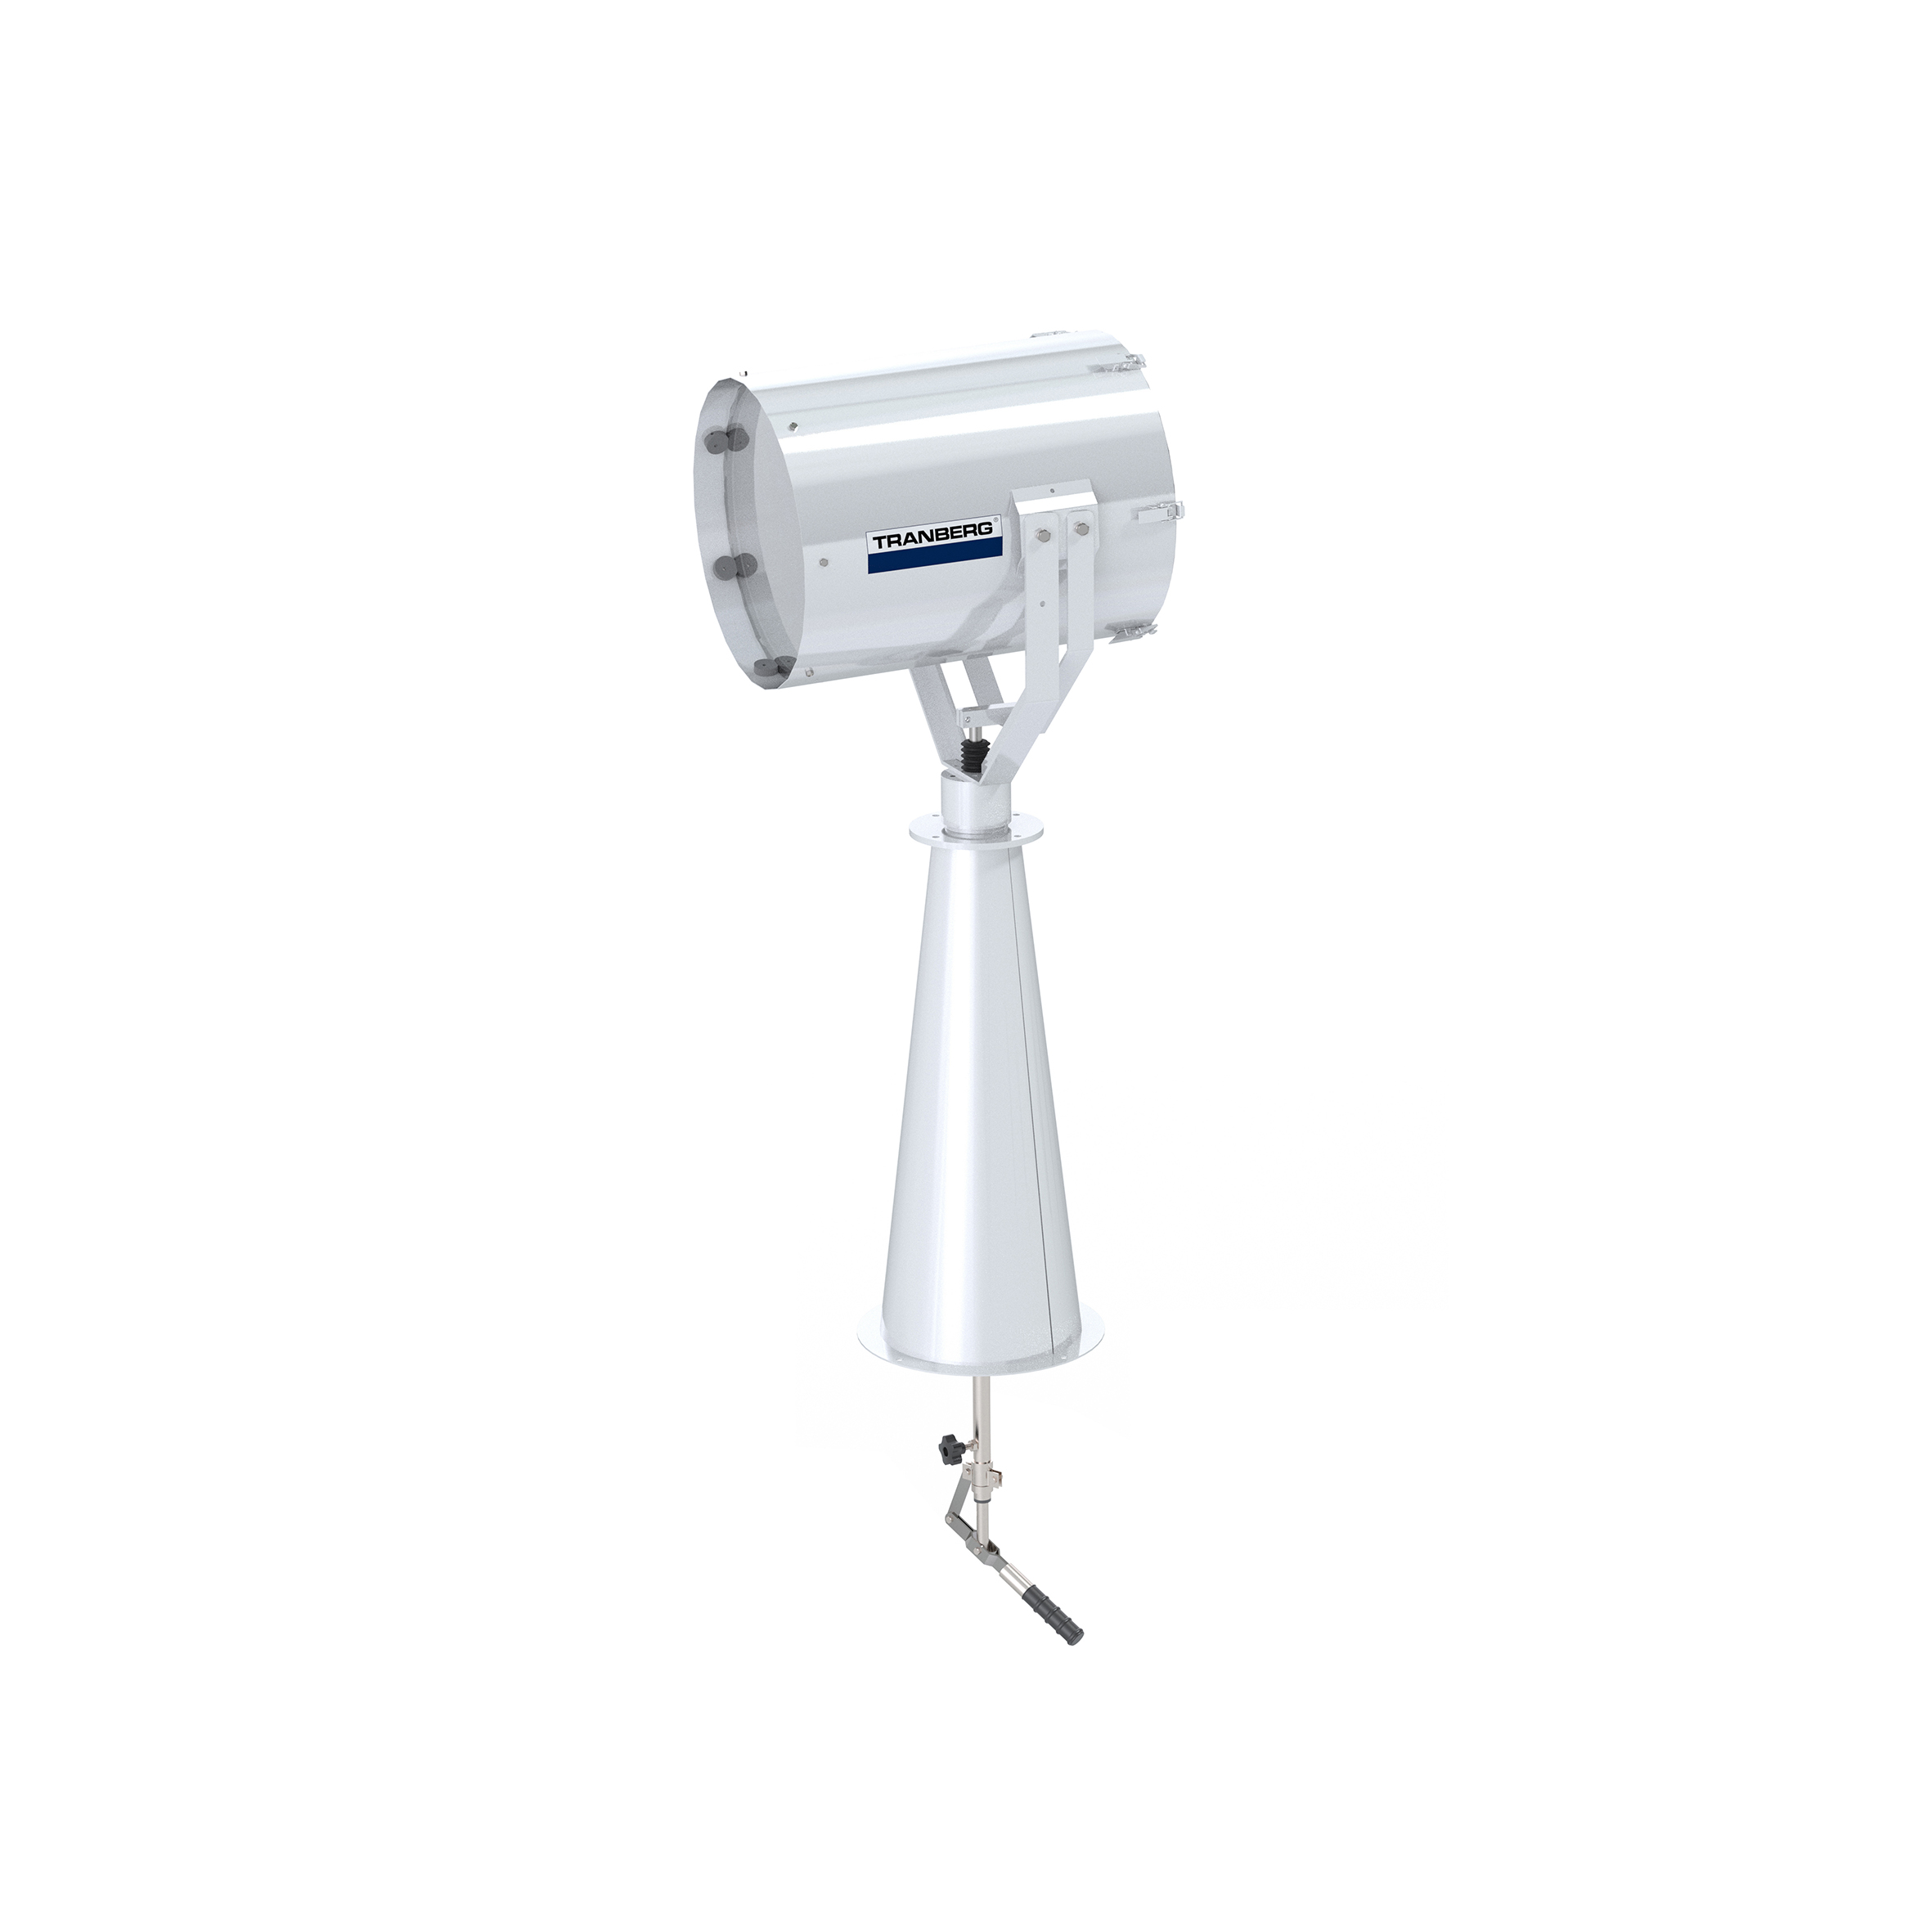 TEF 2630 Searchlight: Halogen 2000W bulb incl, 230V, Bridge Controlled, Stainless Steel, W/300 mm pe photo